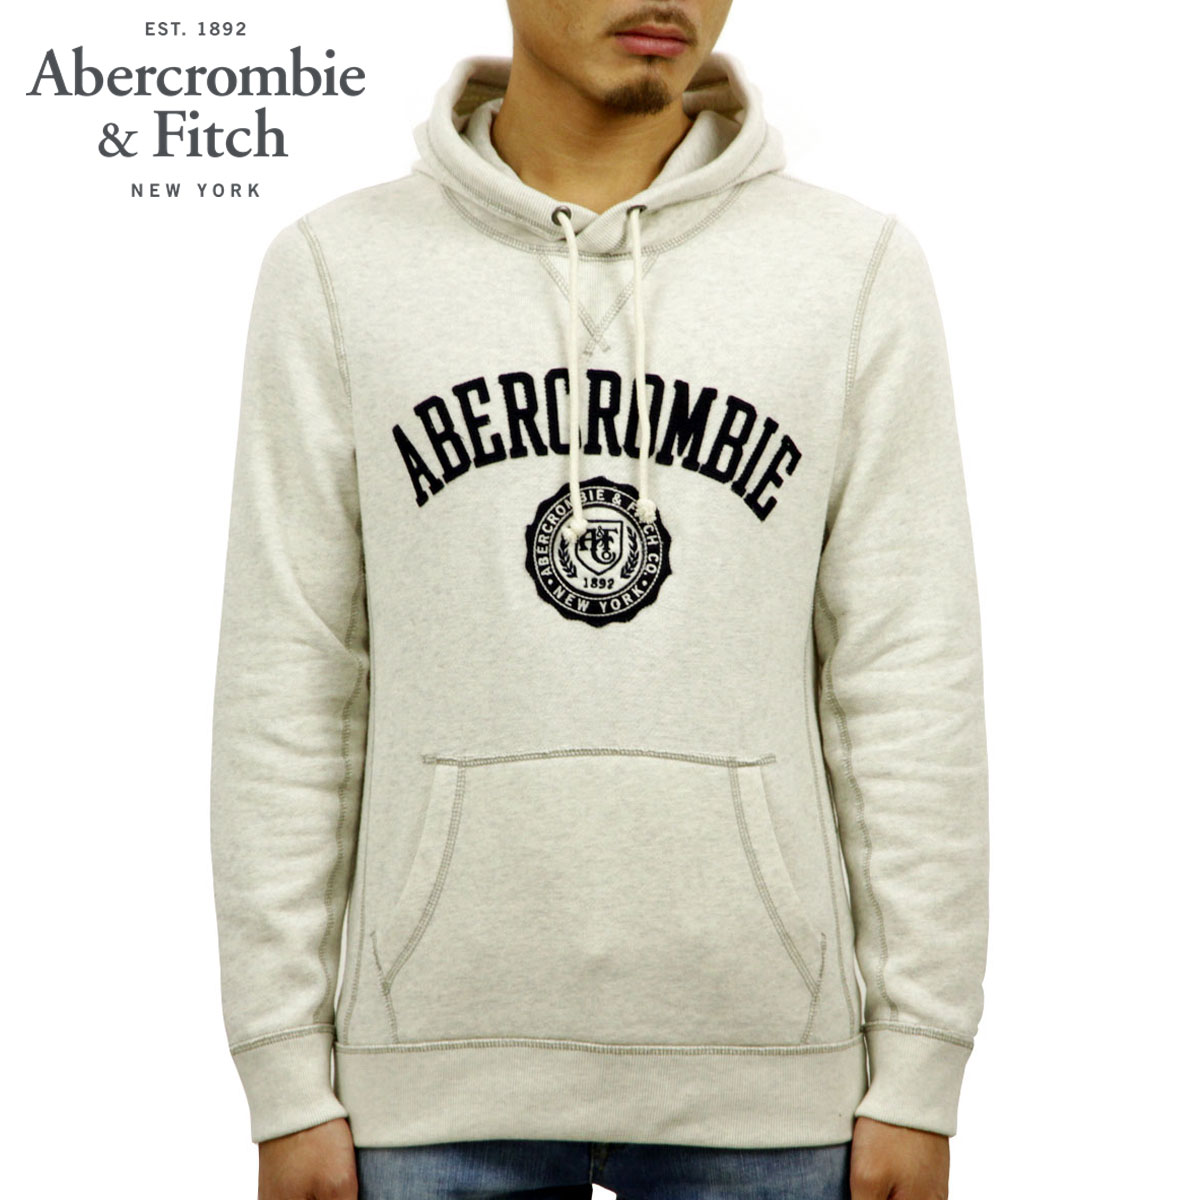 abercrombie and fitch hoodies mens